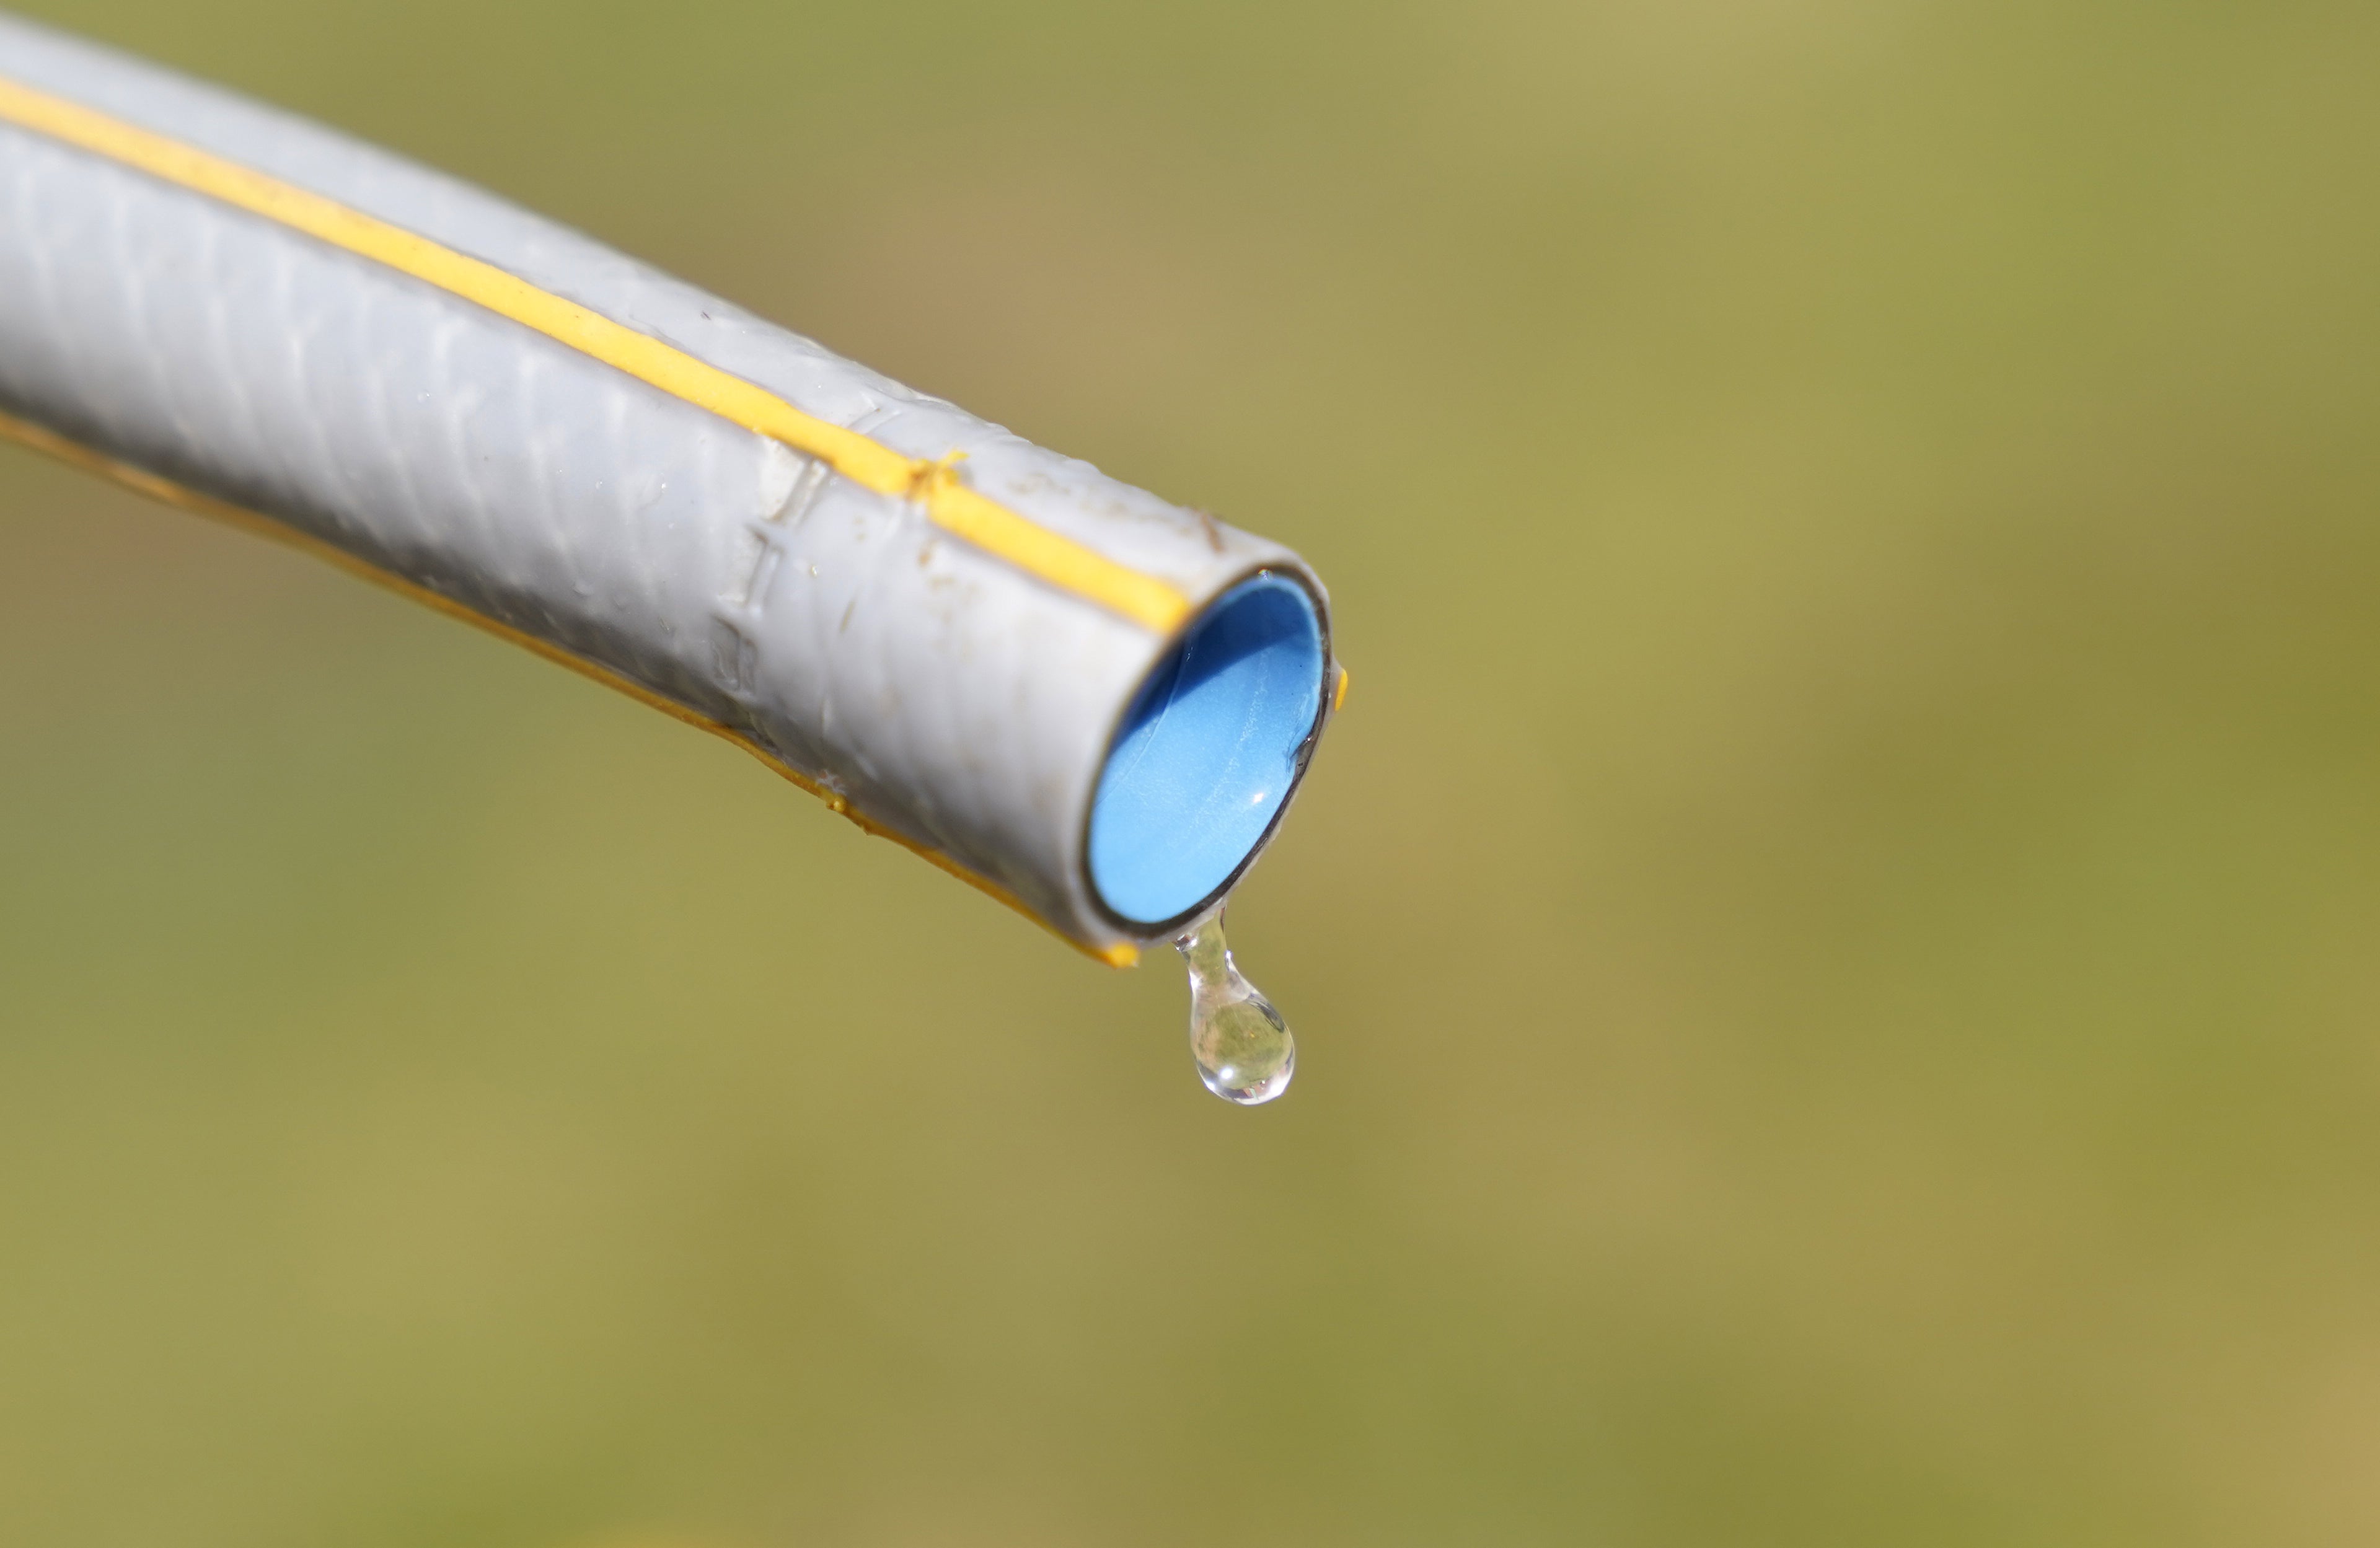 Water companies introduce hosepipe bans to conserve water